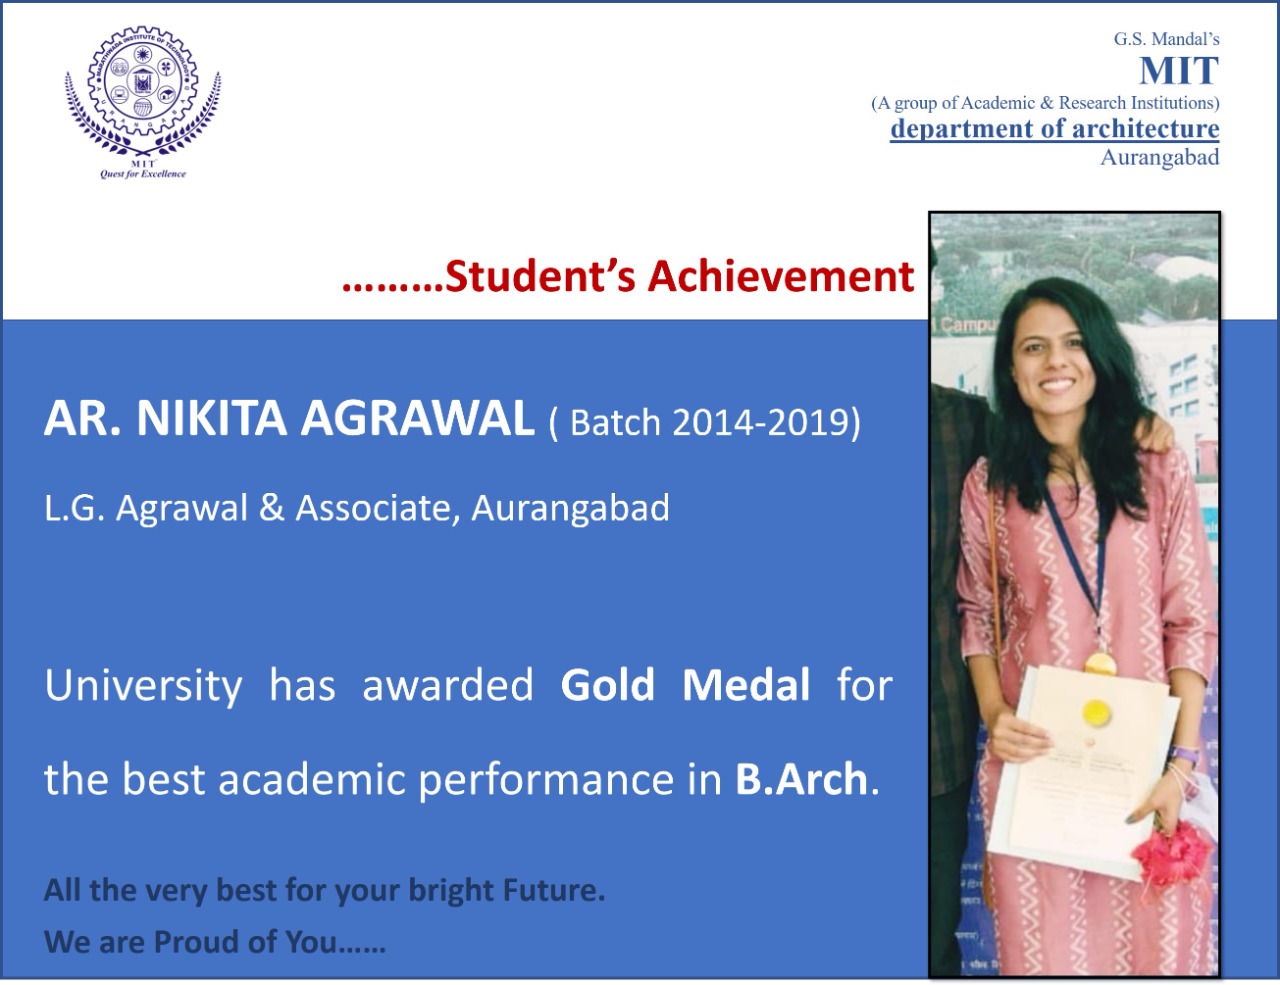 Facilitated for best academic performance in B.Arch by University 